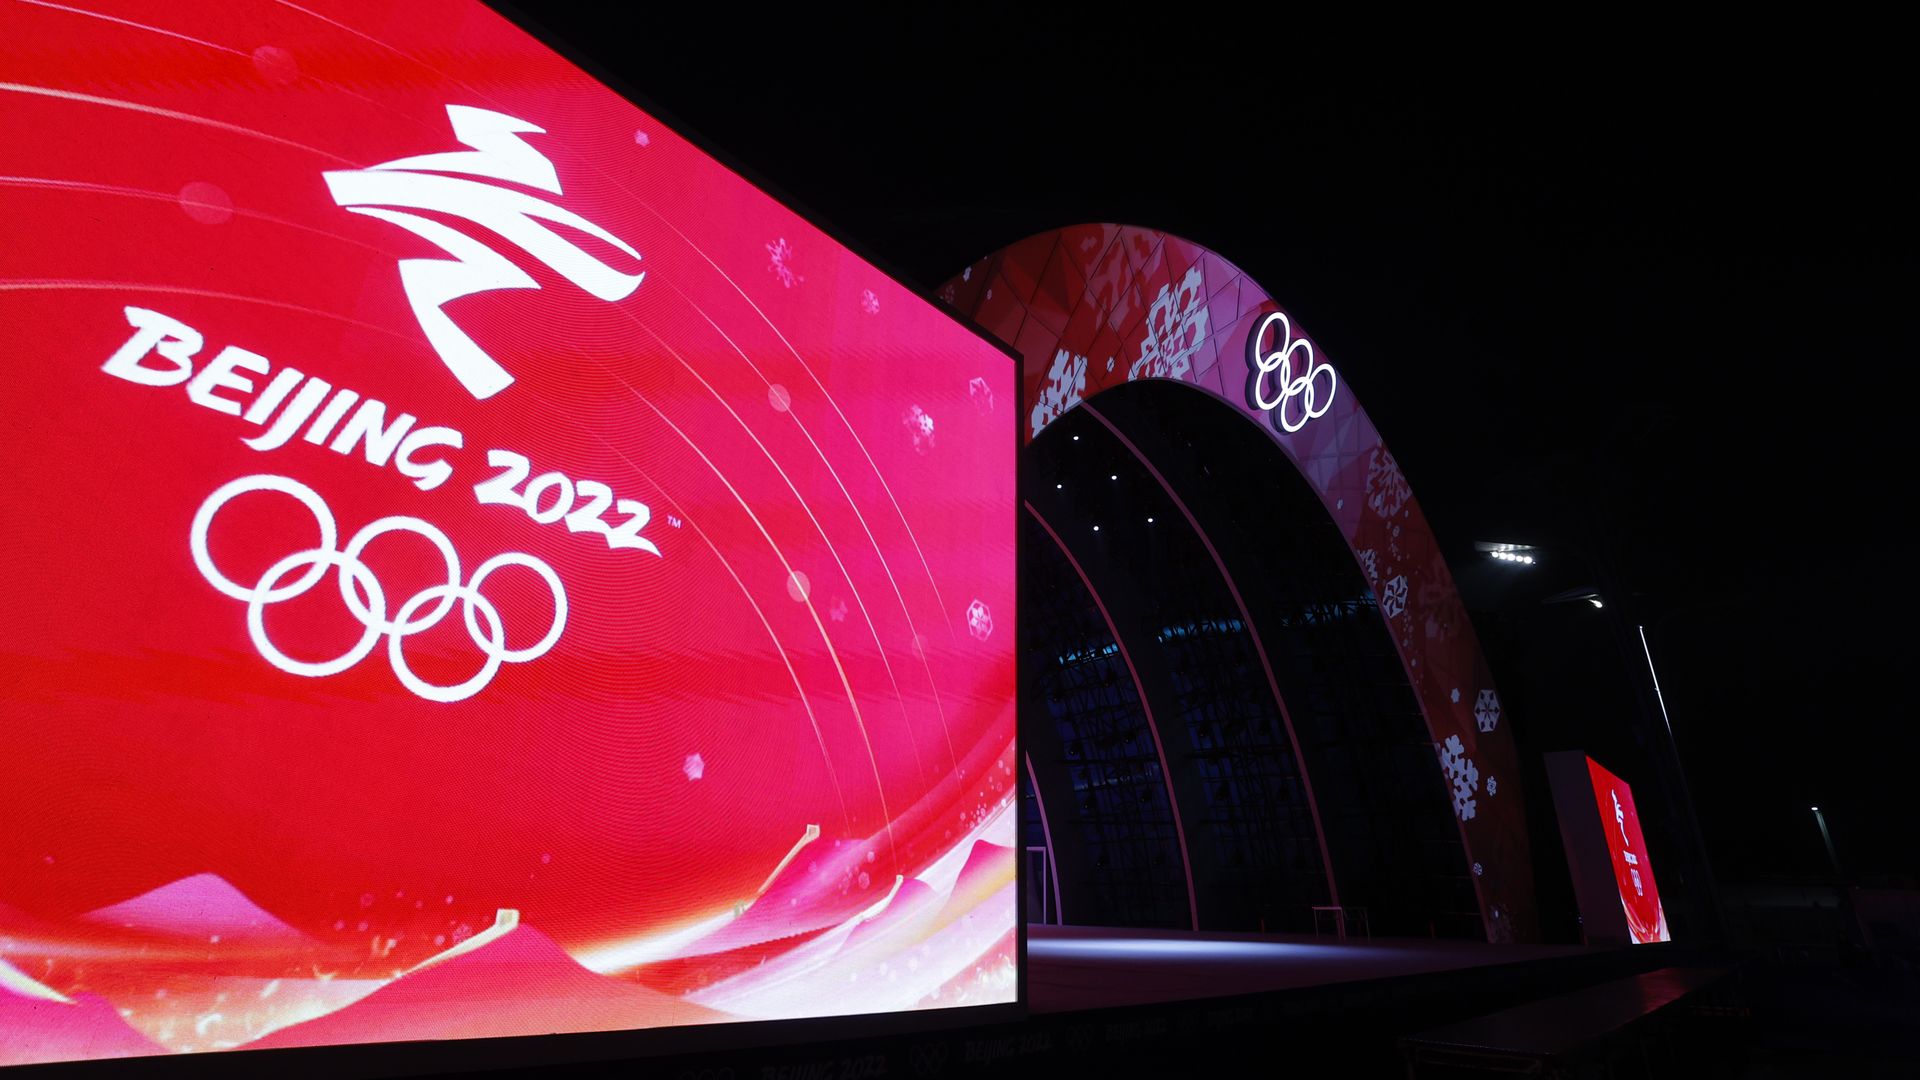 The stage for awarding ceremony of the Beijing 2022 Winter Olympics 